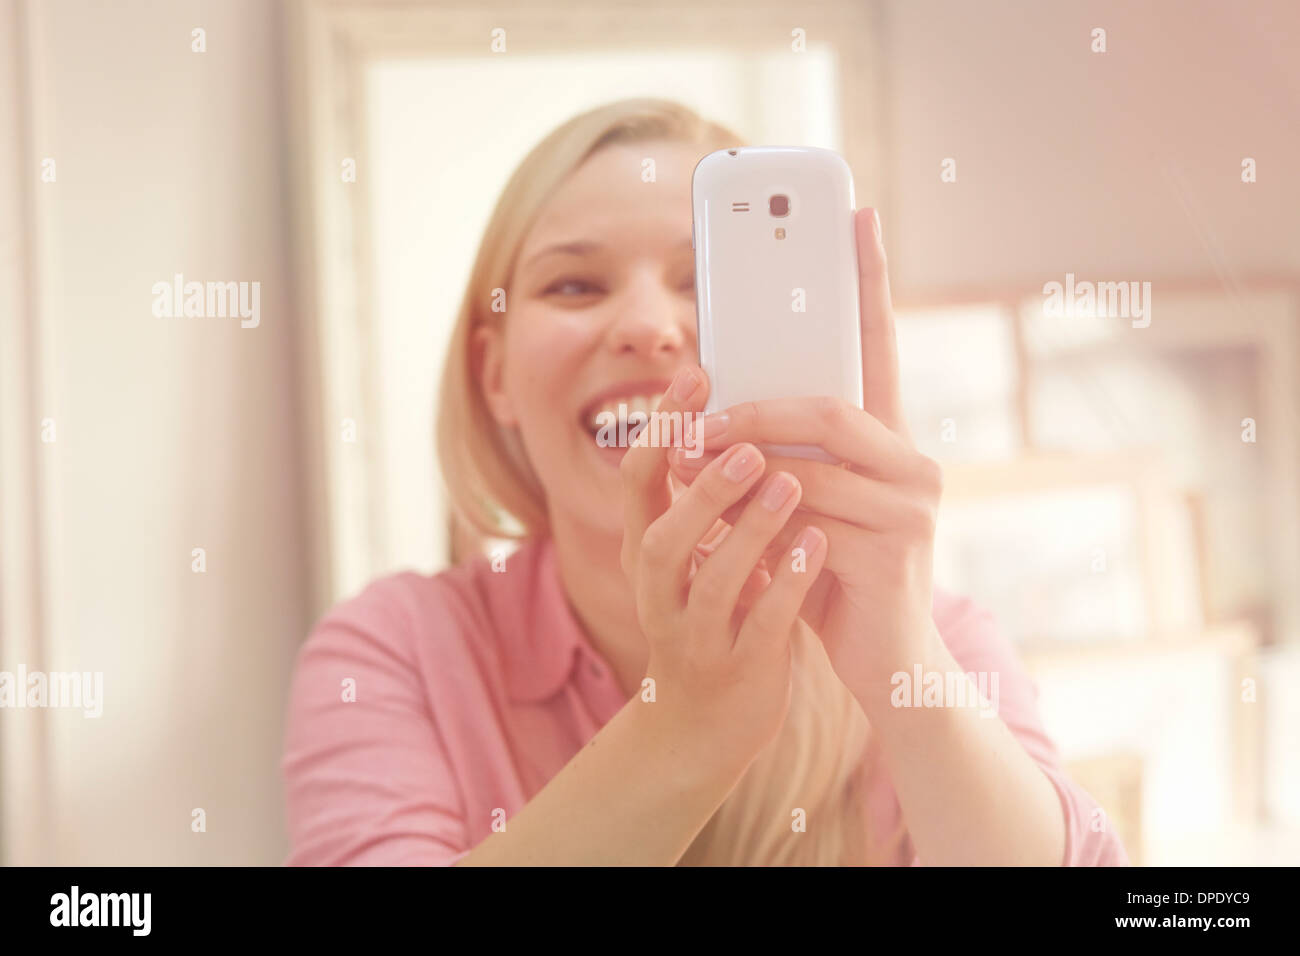 Young woman taking self portrait photograph using smartphone Stock Photo